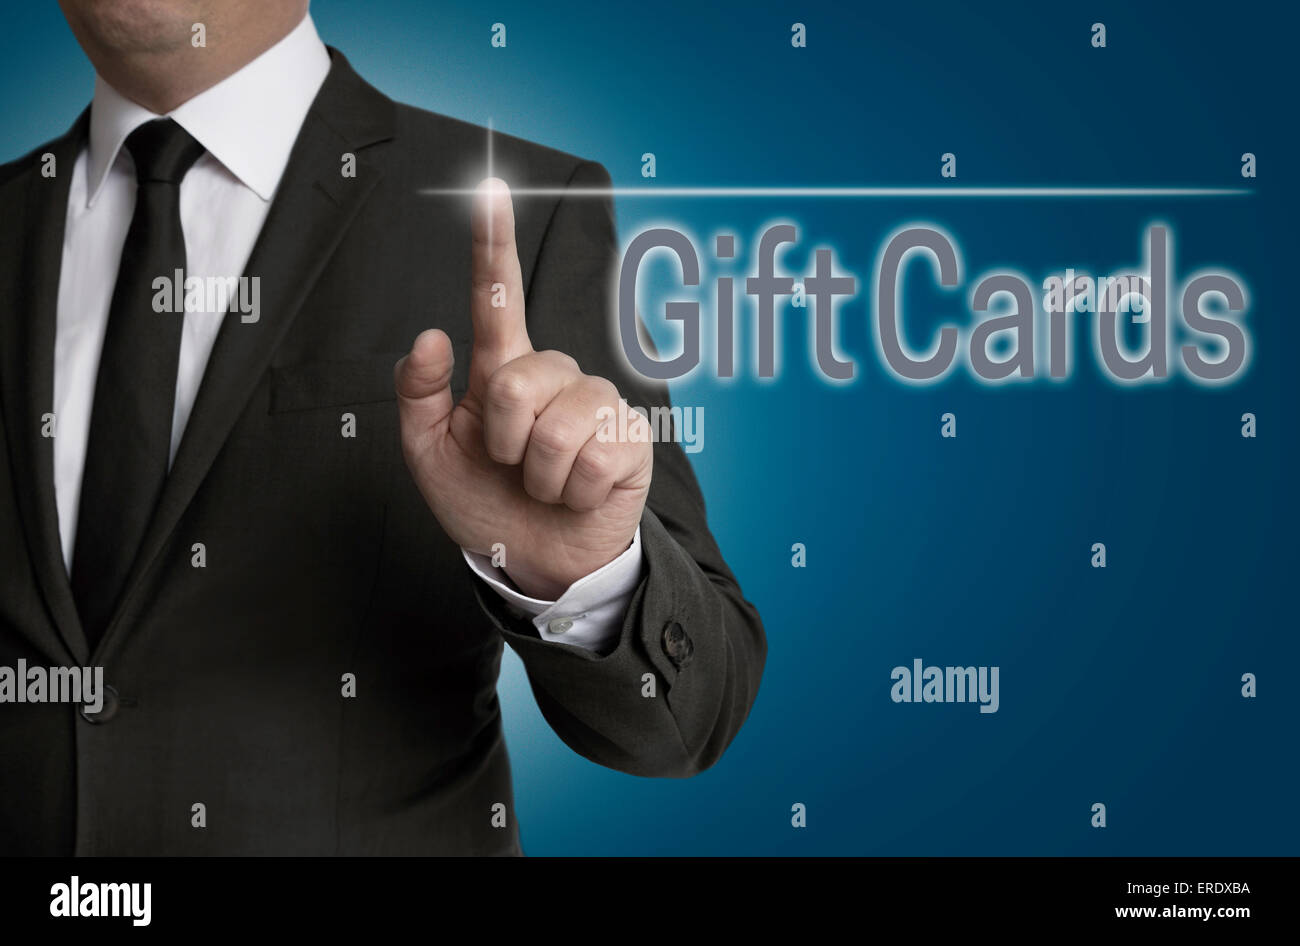 giftcard touchscreen is operated by businessman. Stock Photo